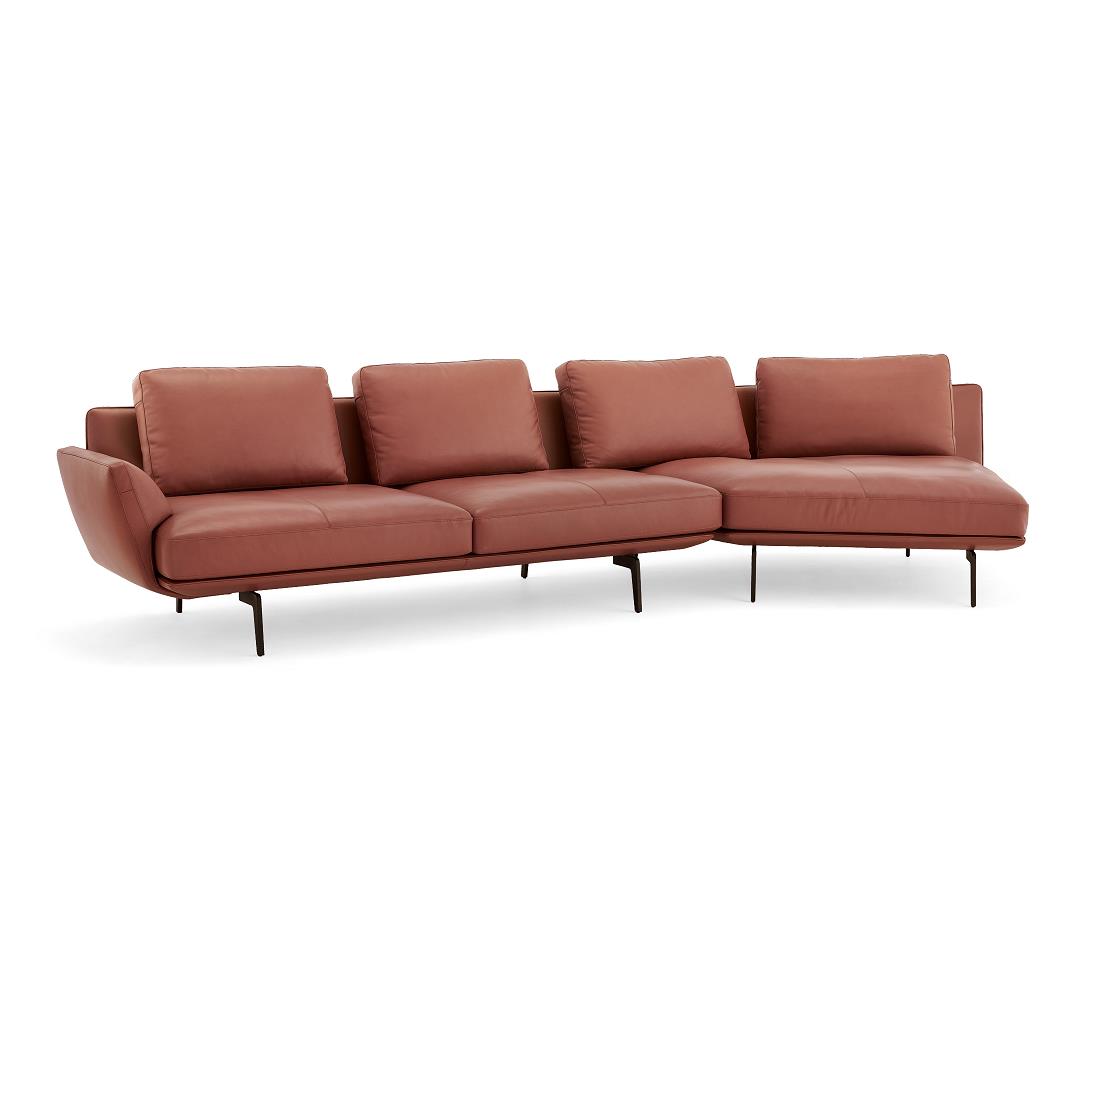 Leather Sofa Set For Living Room